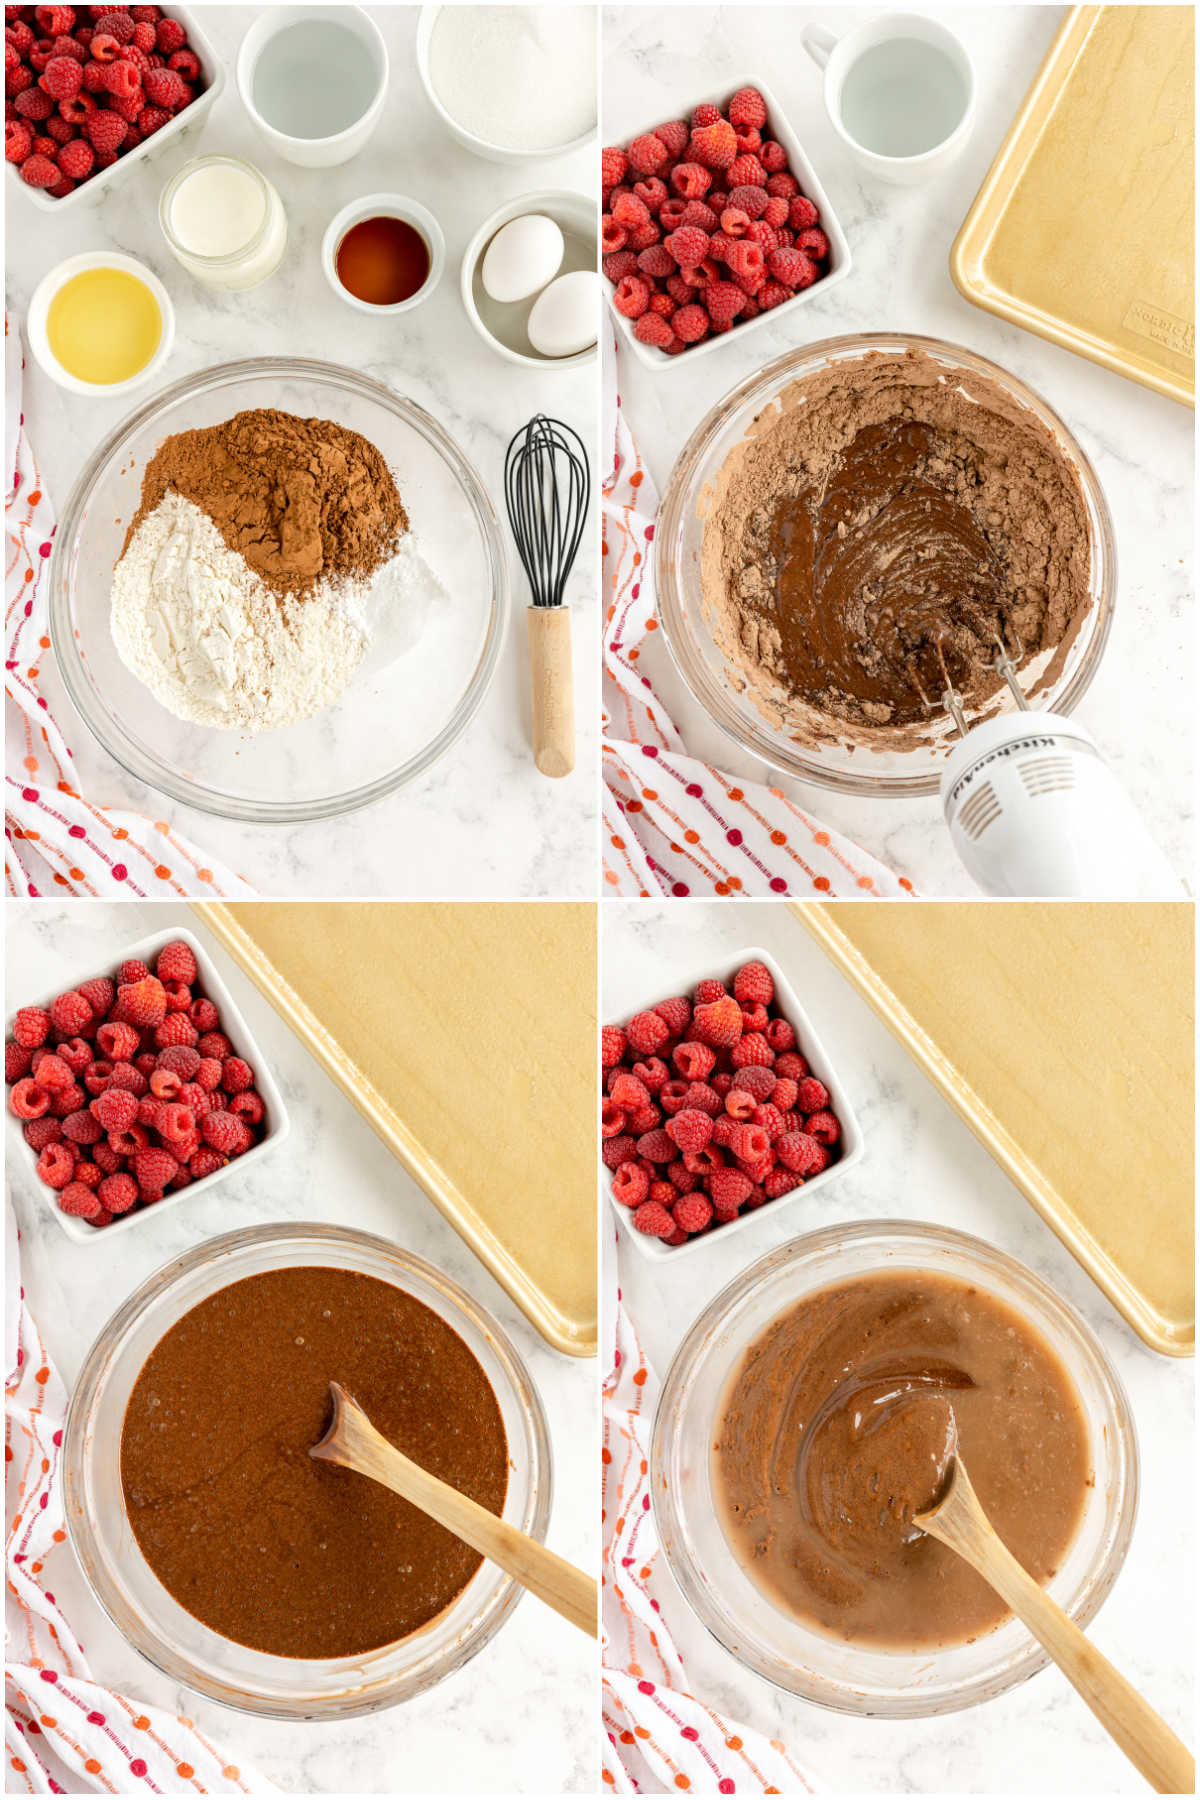 four images showing making batter for a chocolate cake